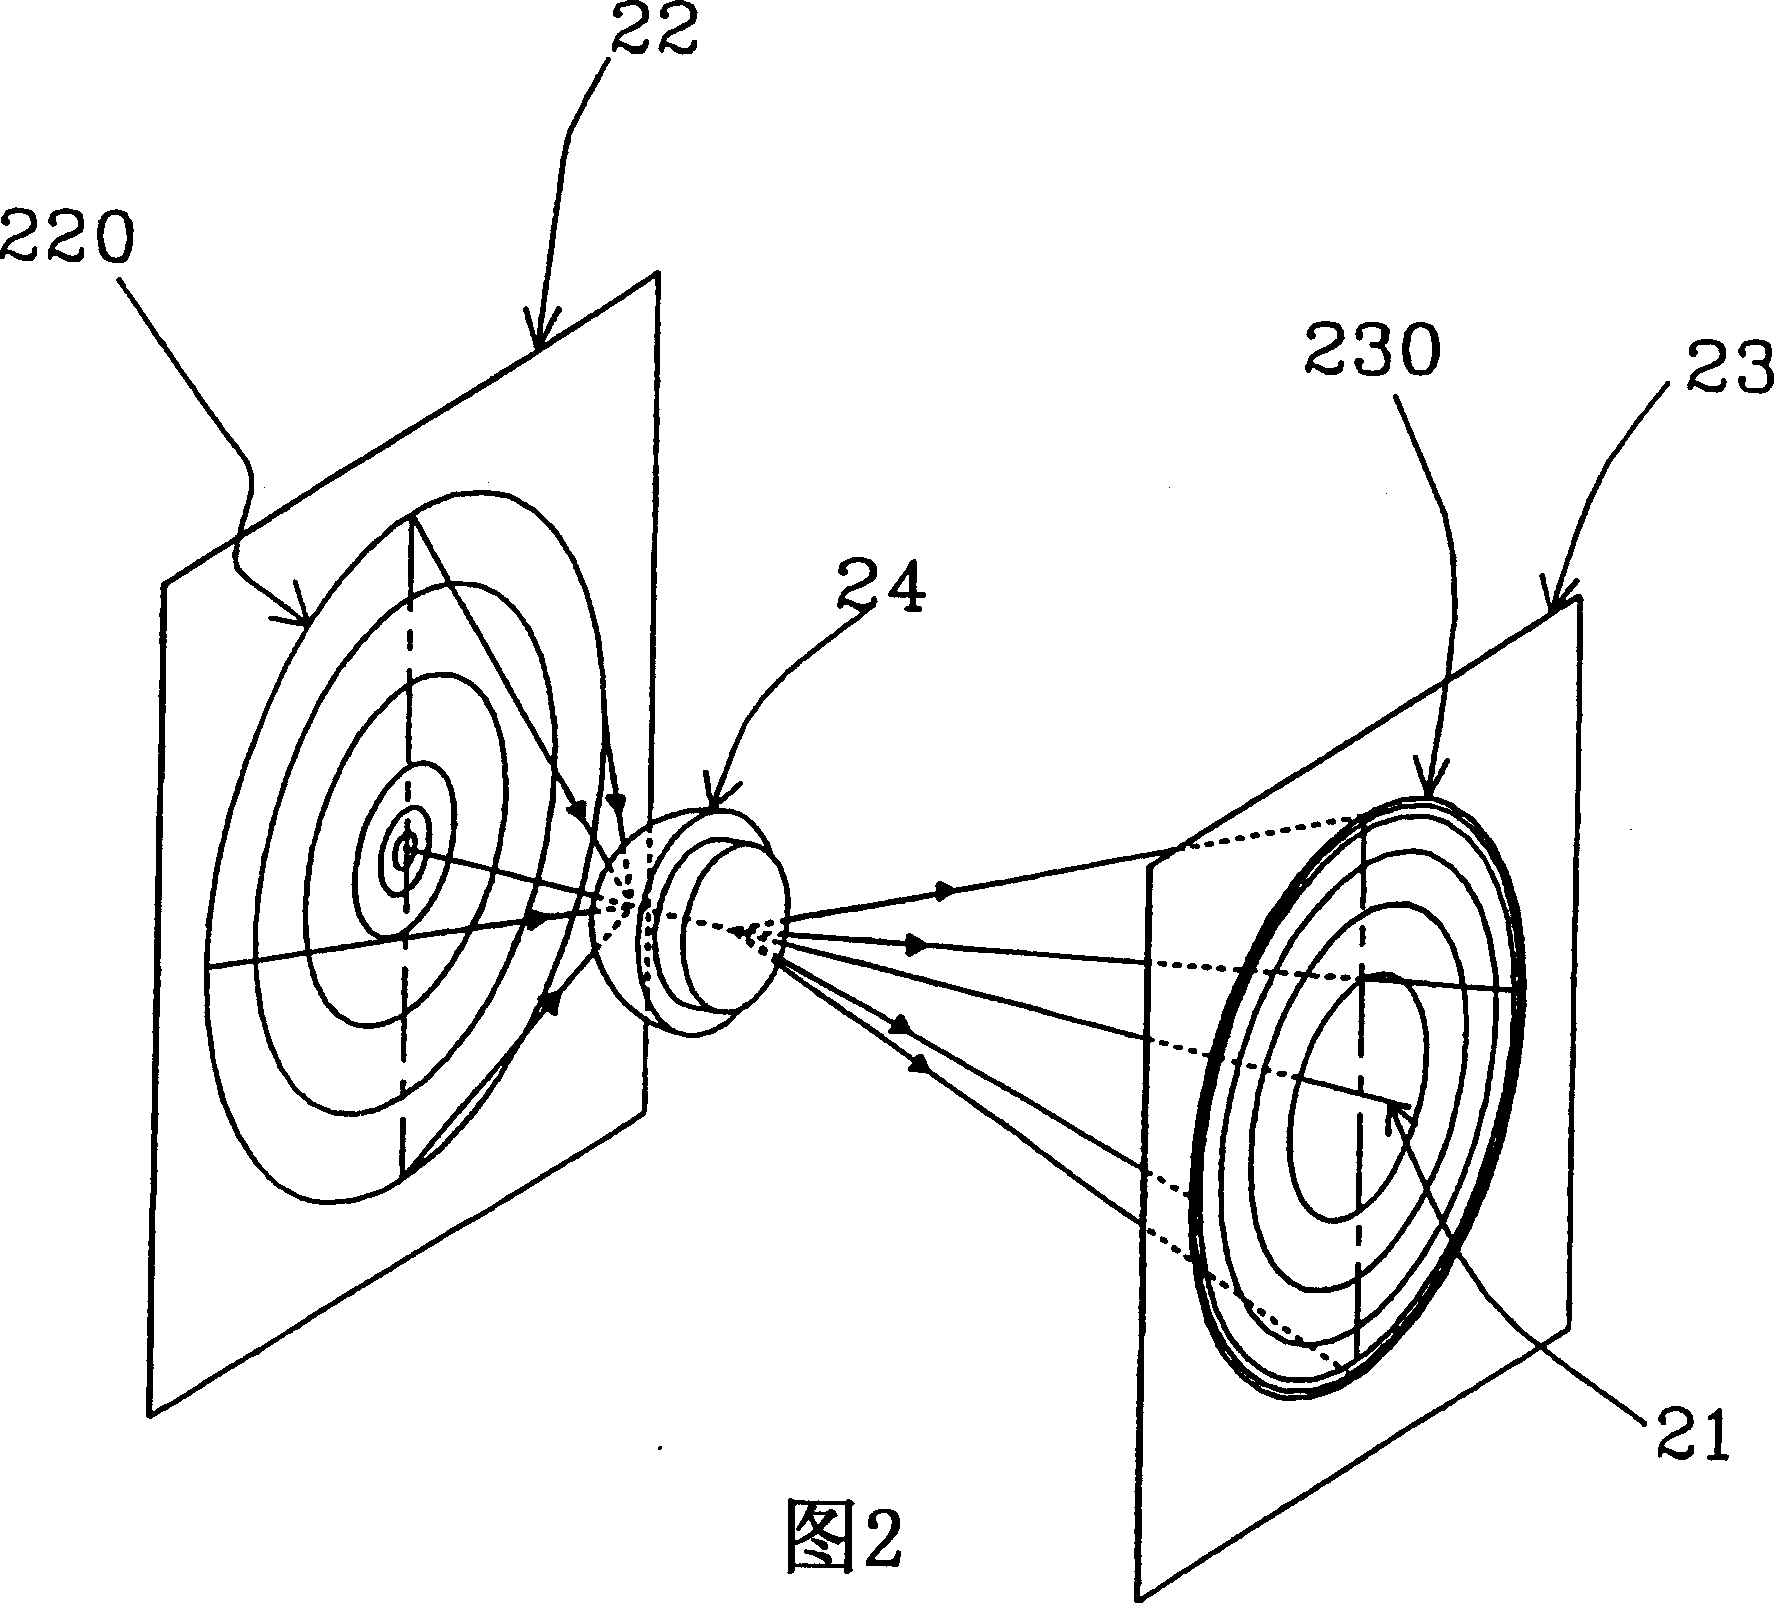 Method for obtaing optical projection parameter of camera